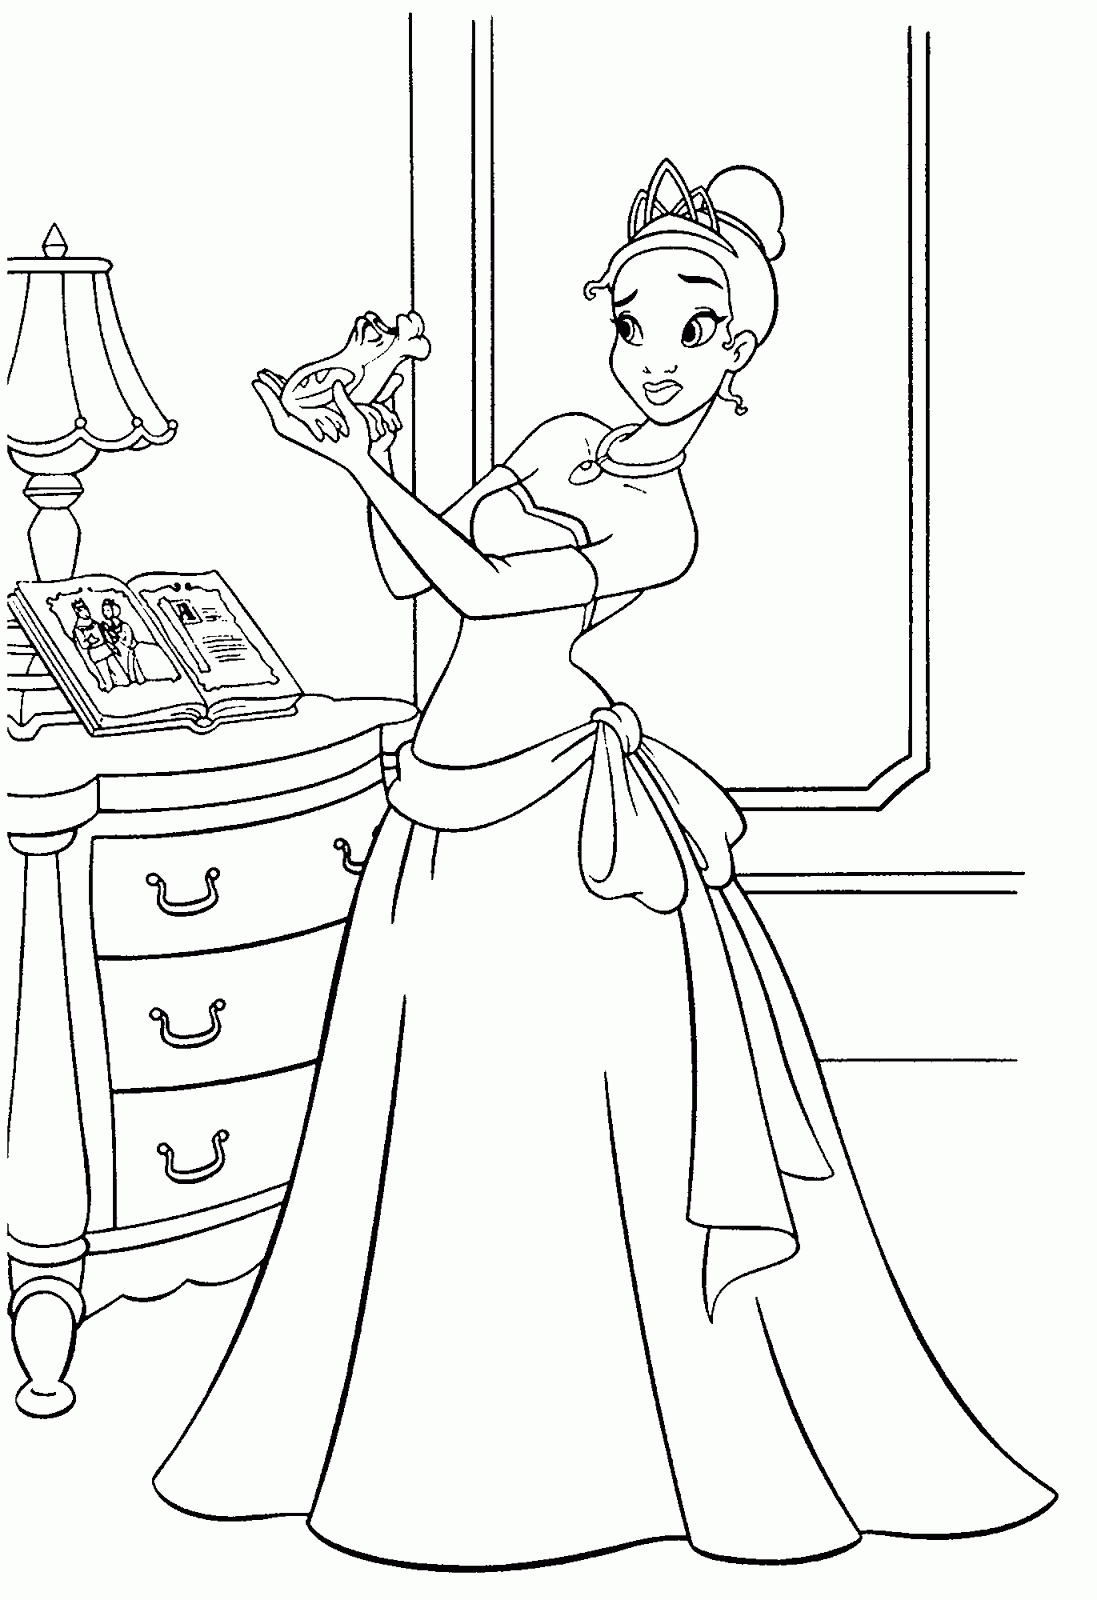 The Princess And The Frog coloring page